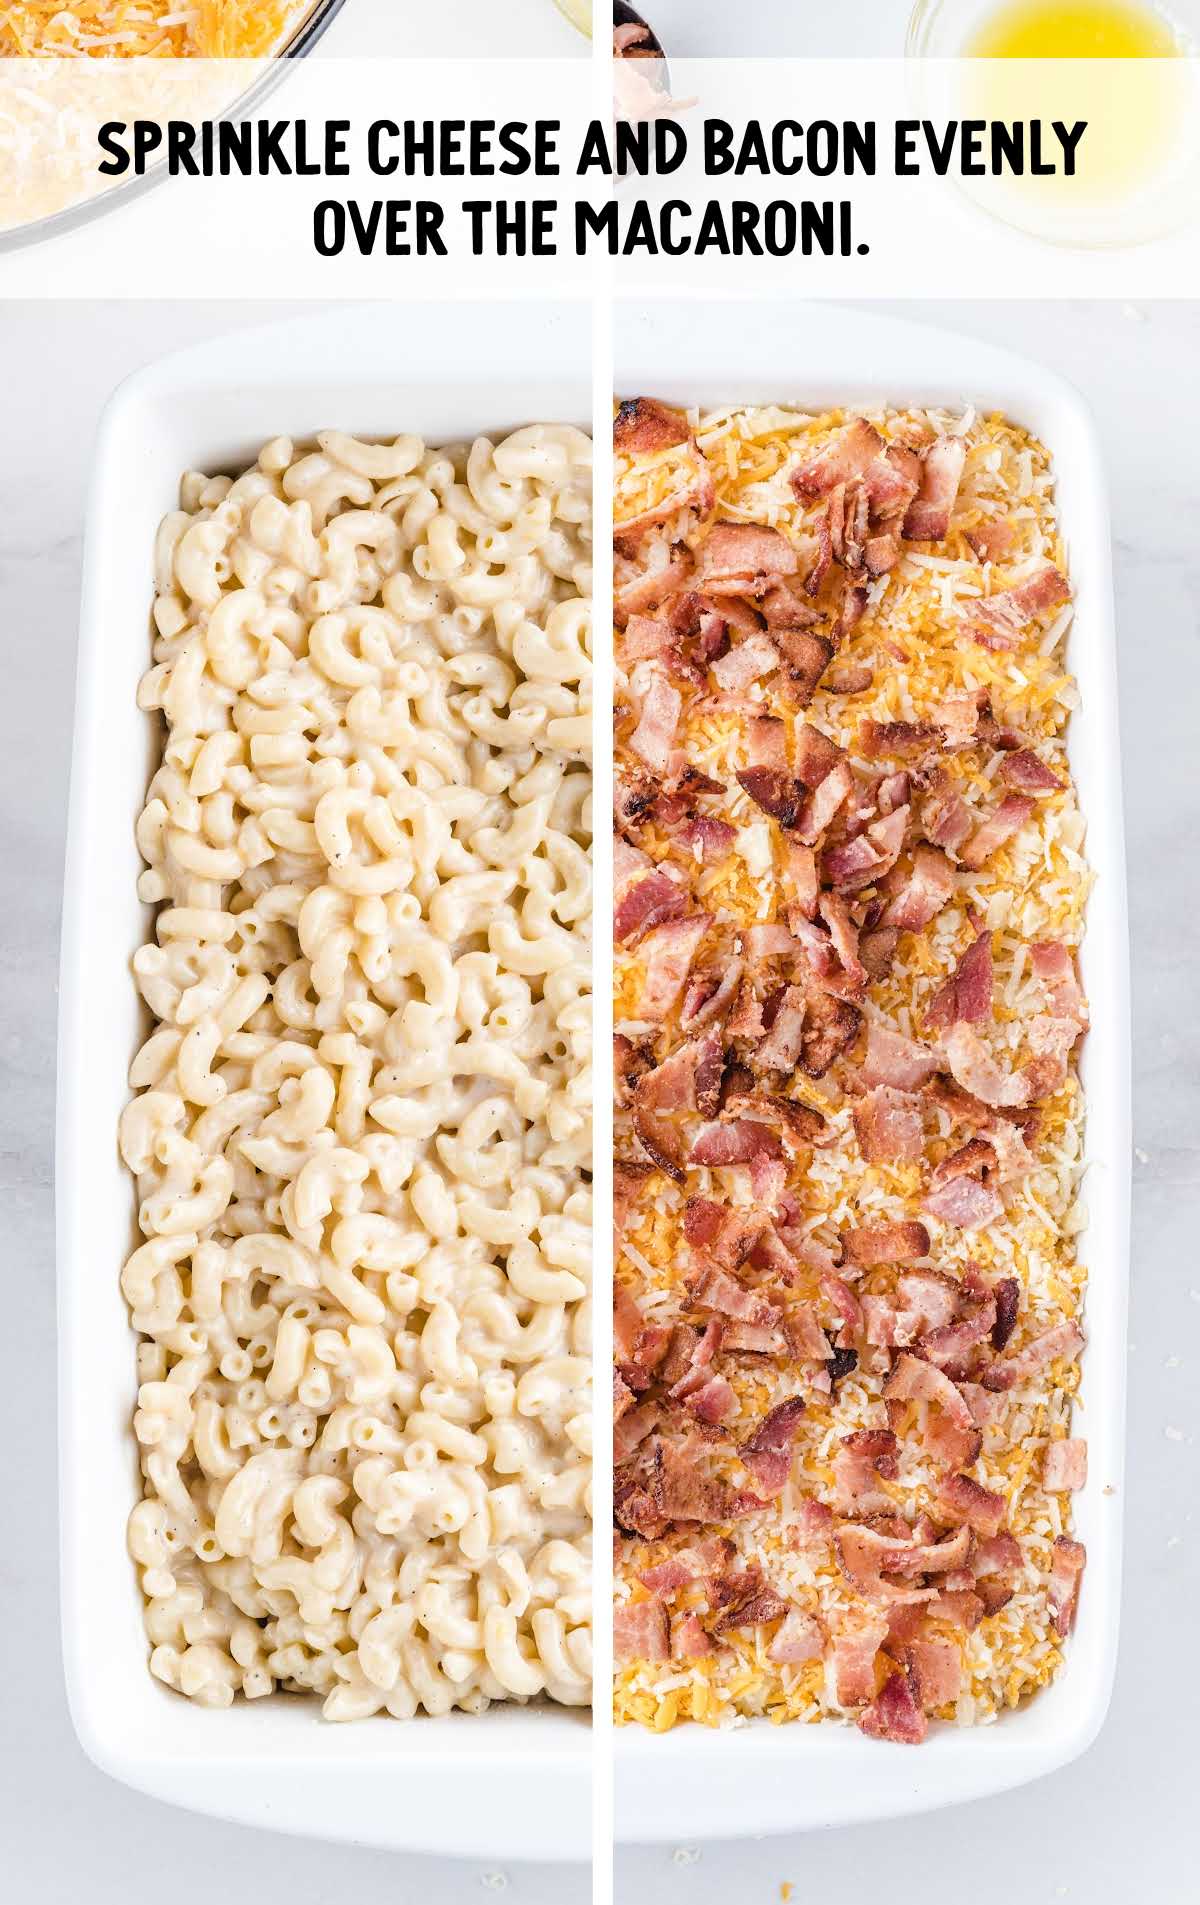 bacon and cheese sprinkled over the macaroni in a baking dish 